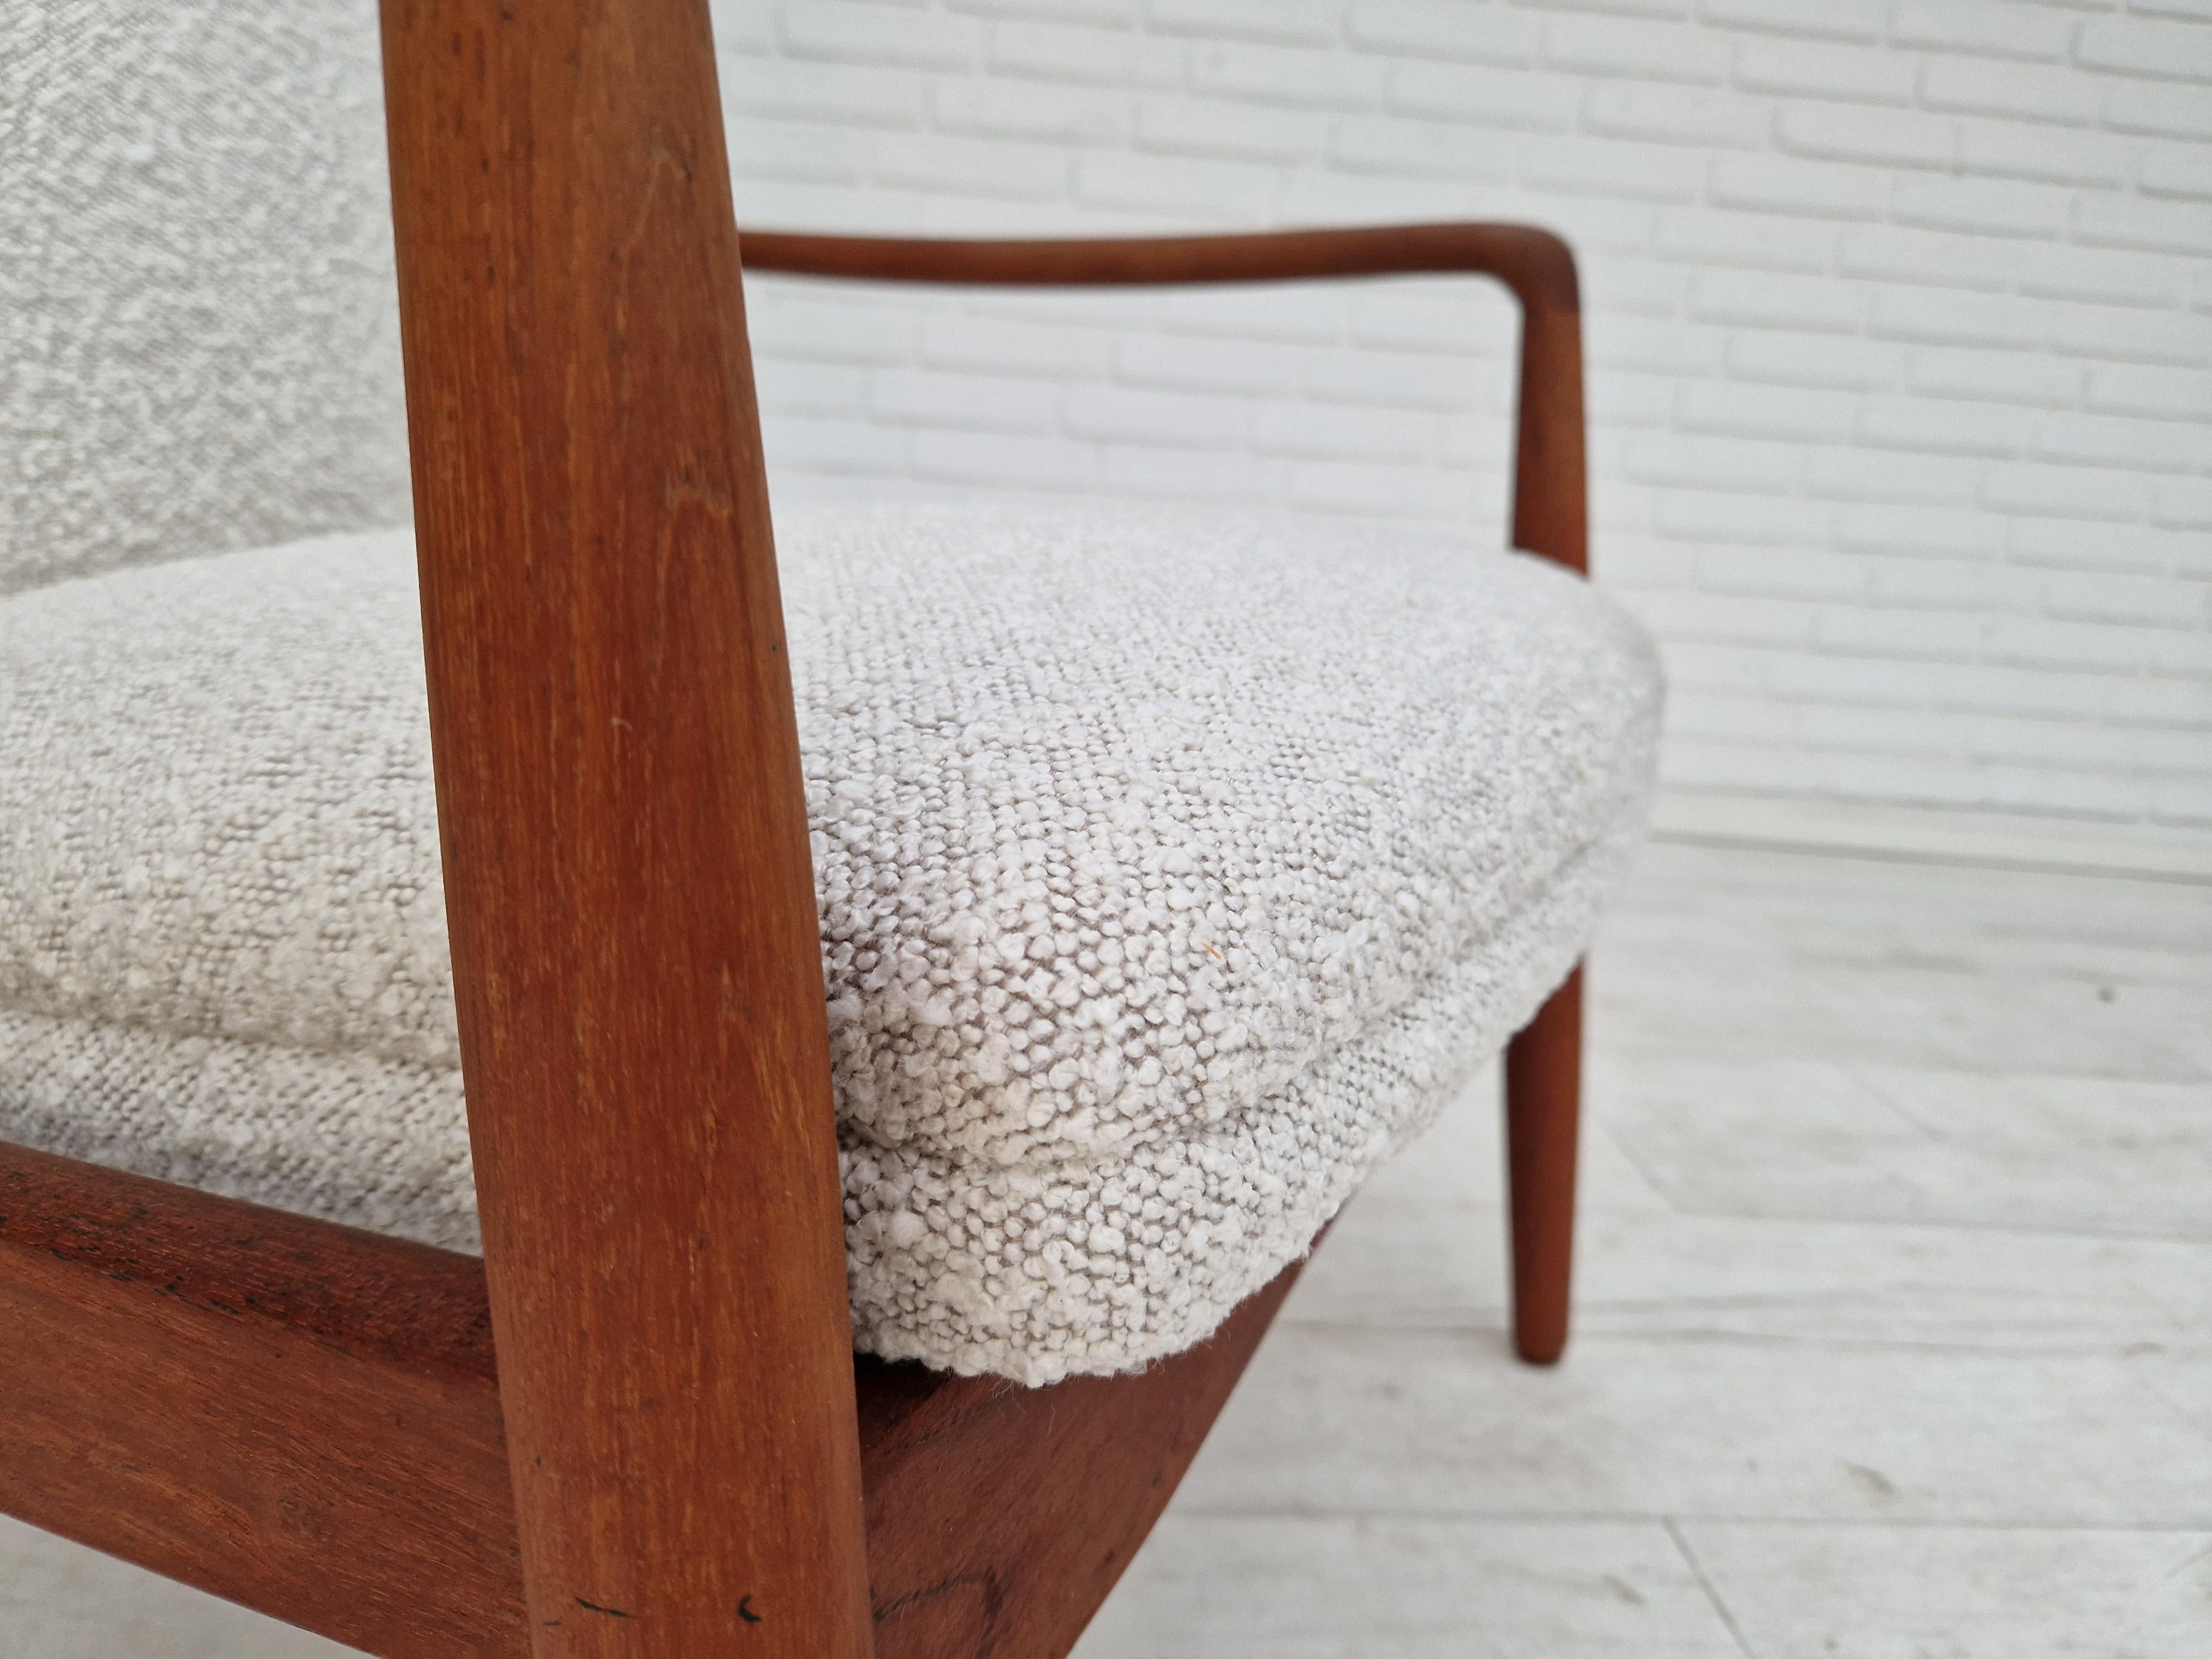 1960s, Danish design by Søren Ladefoged. Teak armchair. Completely reupholstered in quality white/beige furniture fabric. Wood renewed. Neck pillow upholstered with cognac leather. Brand new upholstery and neck pillow. Adjustable seating position.